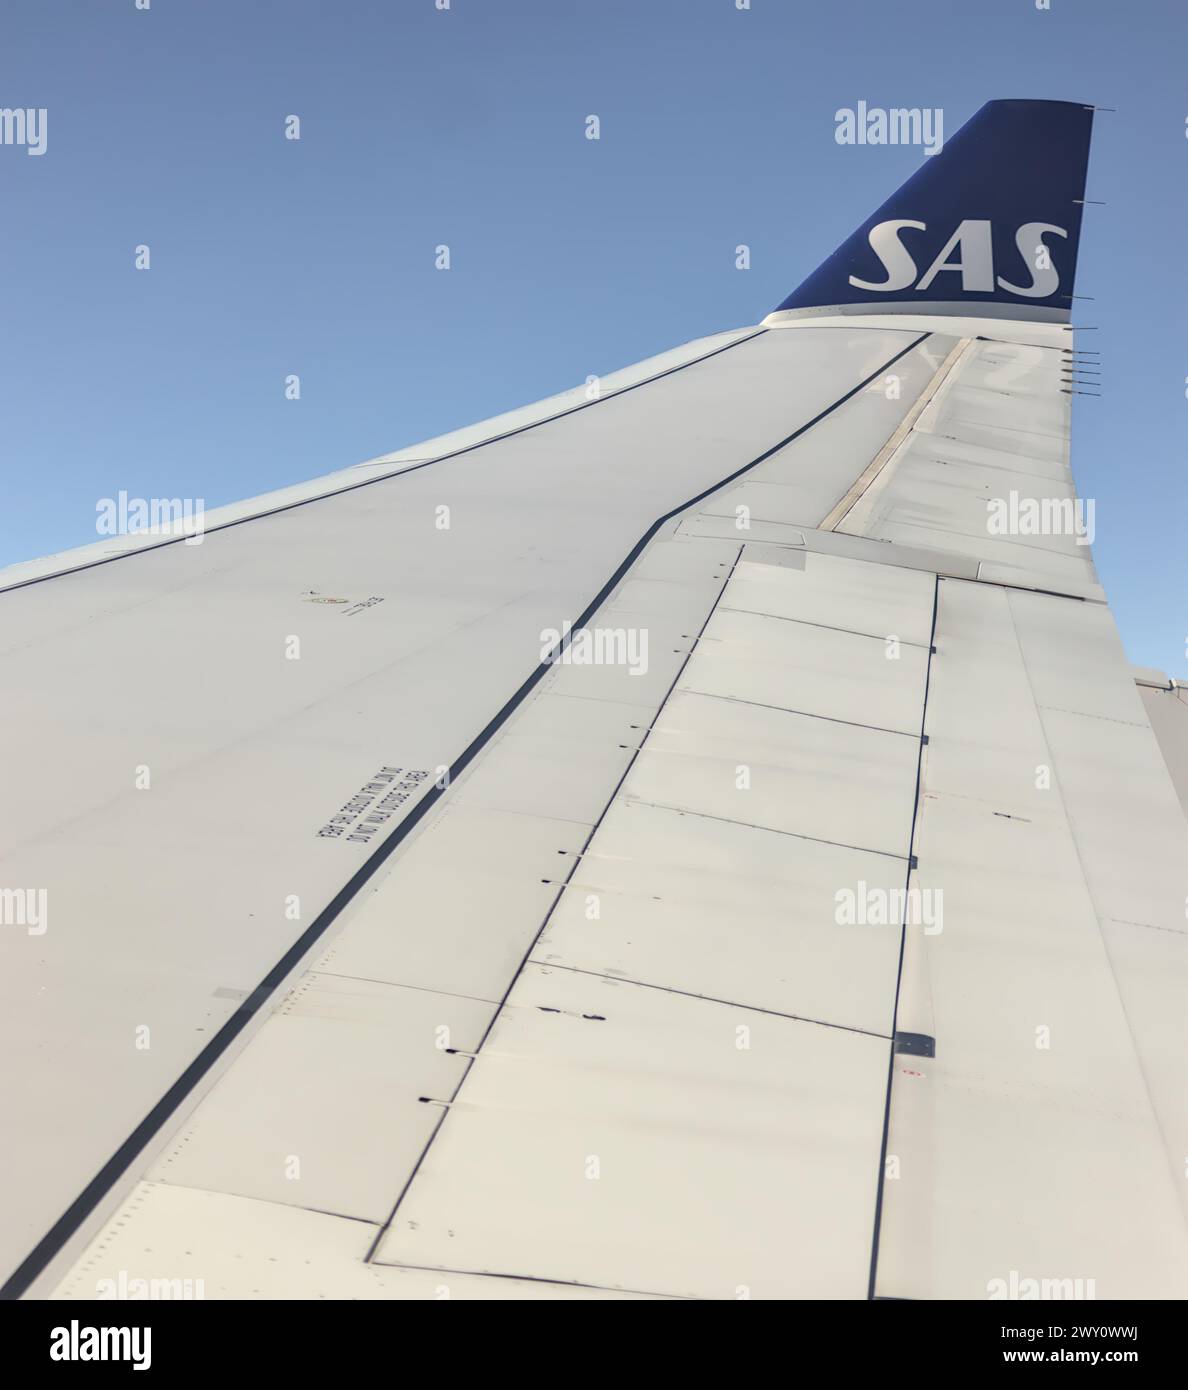 SAS airlines logo on the wing of a Scandinavian Airlines airplane flying through the sky at sunset. Stock Photo